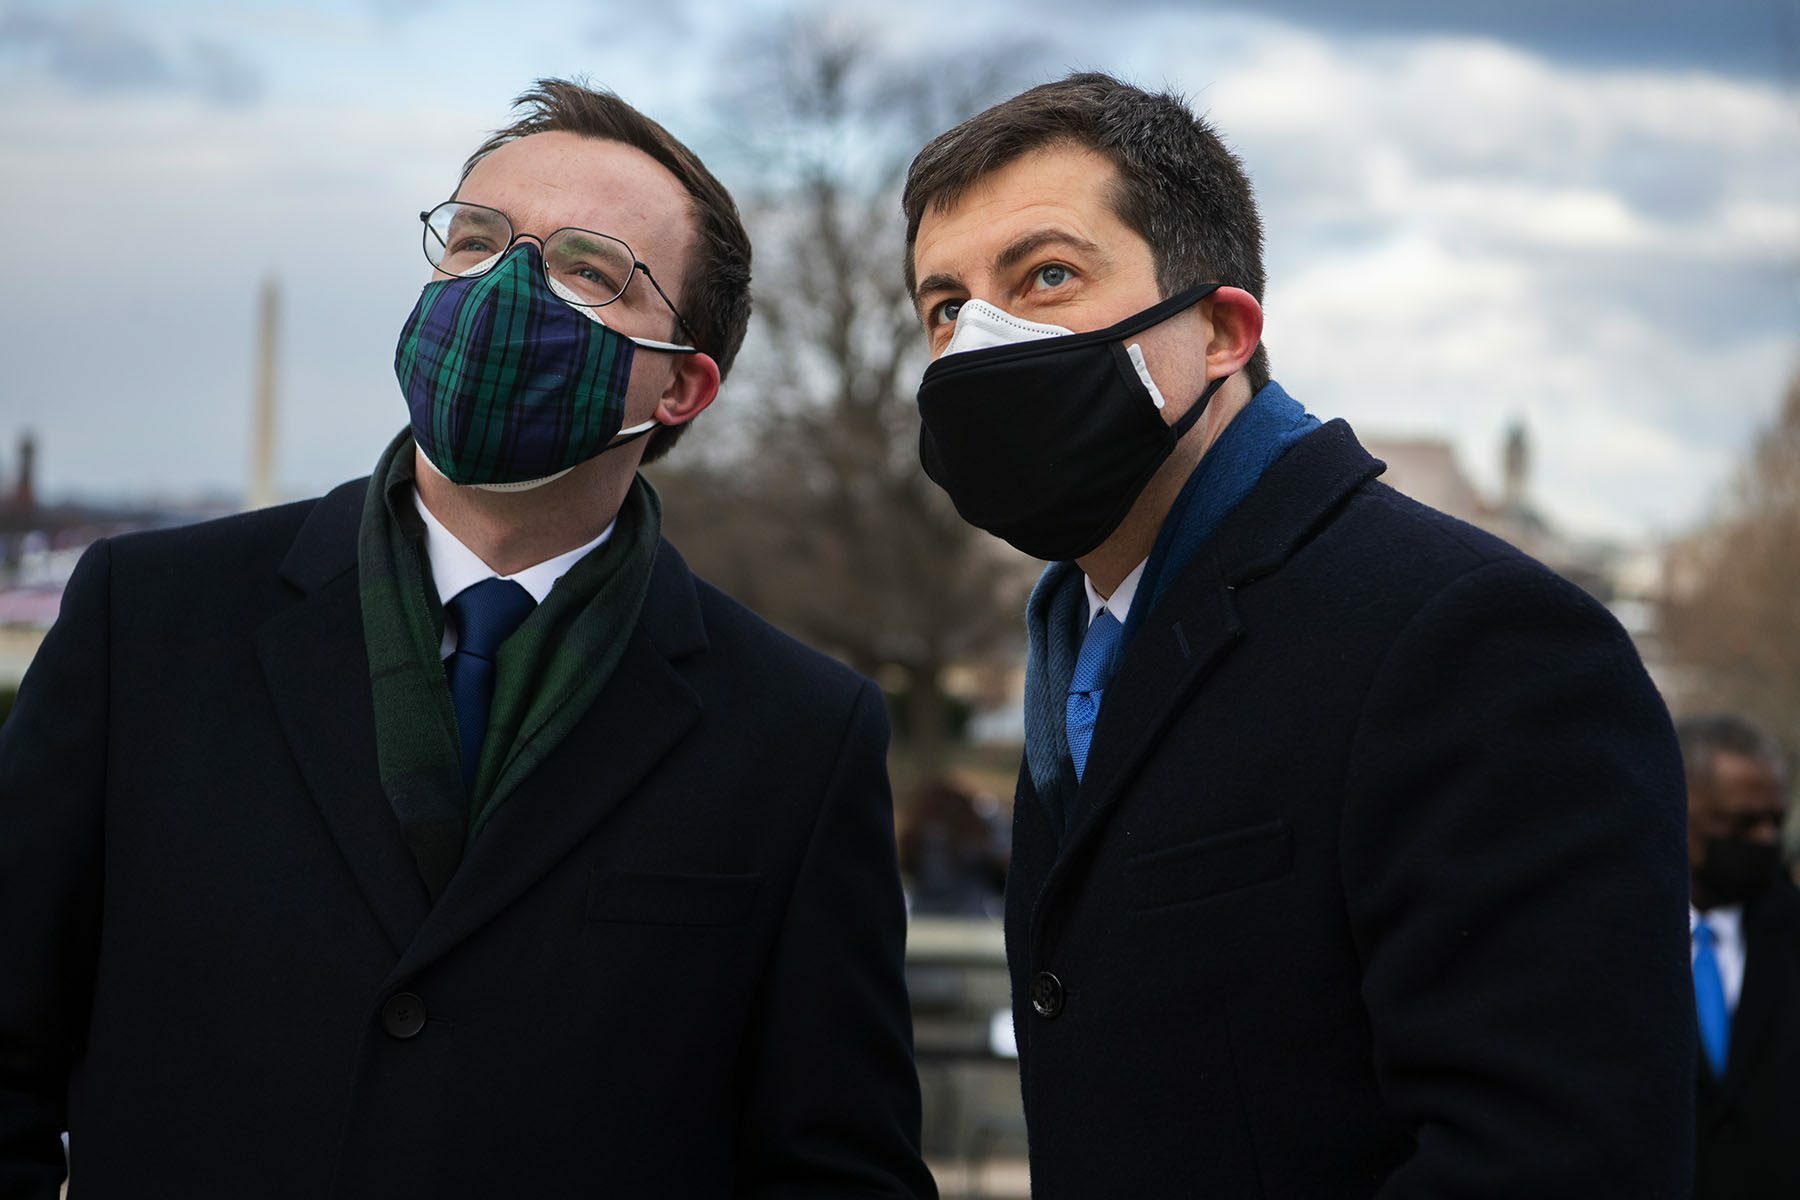 Pete Buttigieg his husband Chasten lean towards each other. They are both wearing face masks.